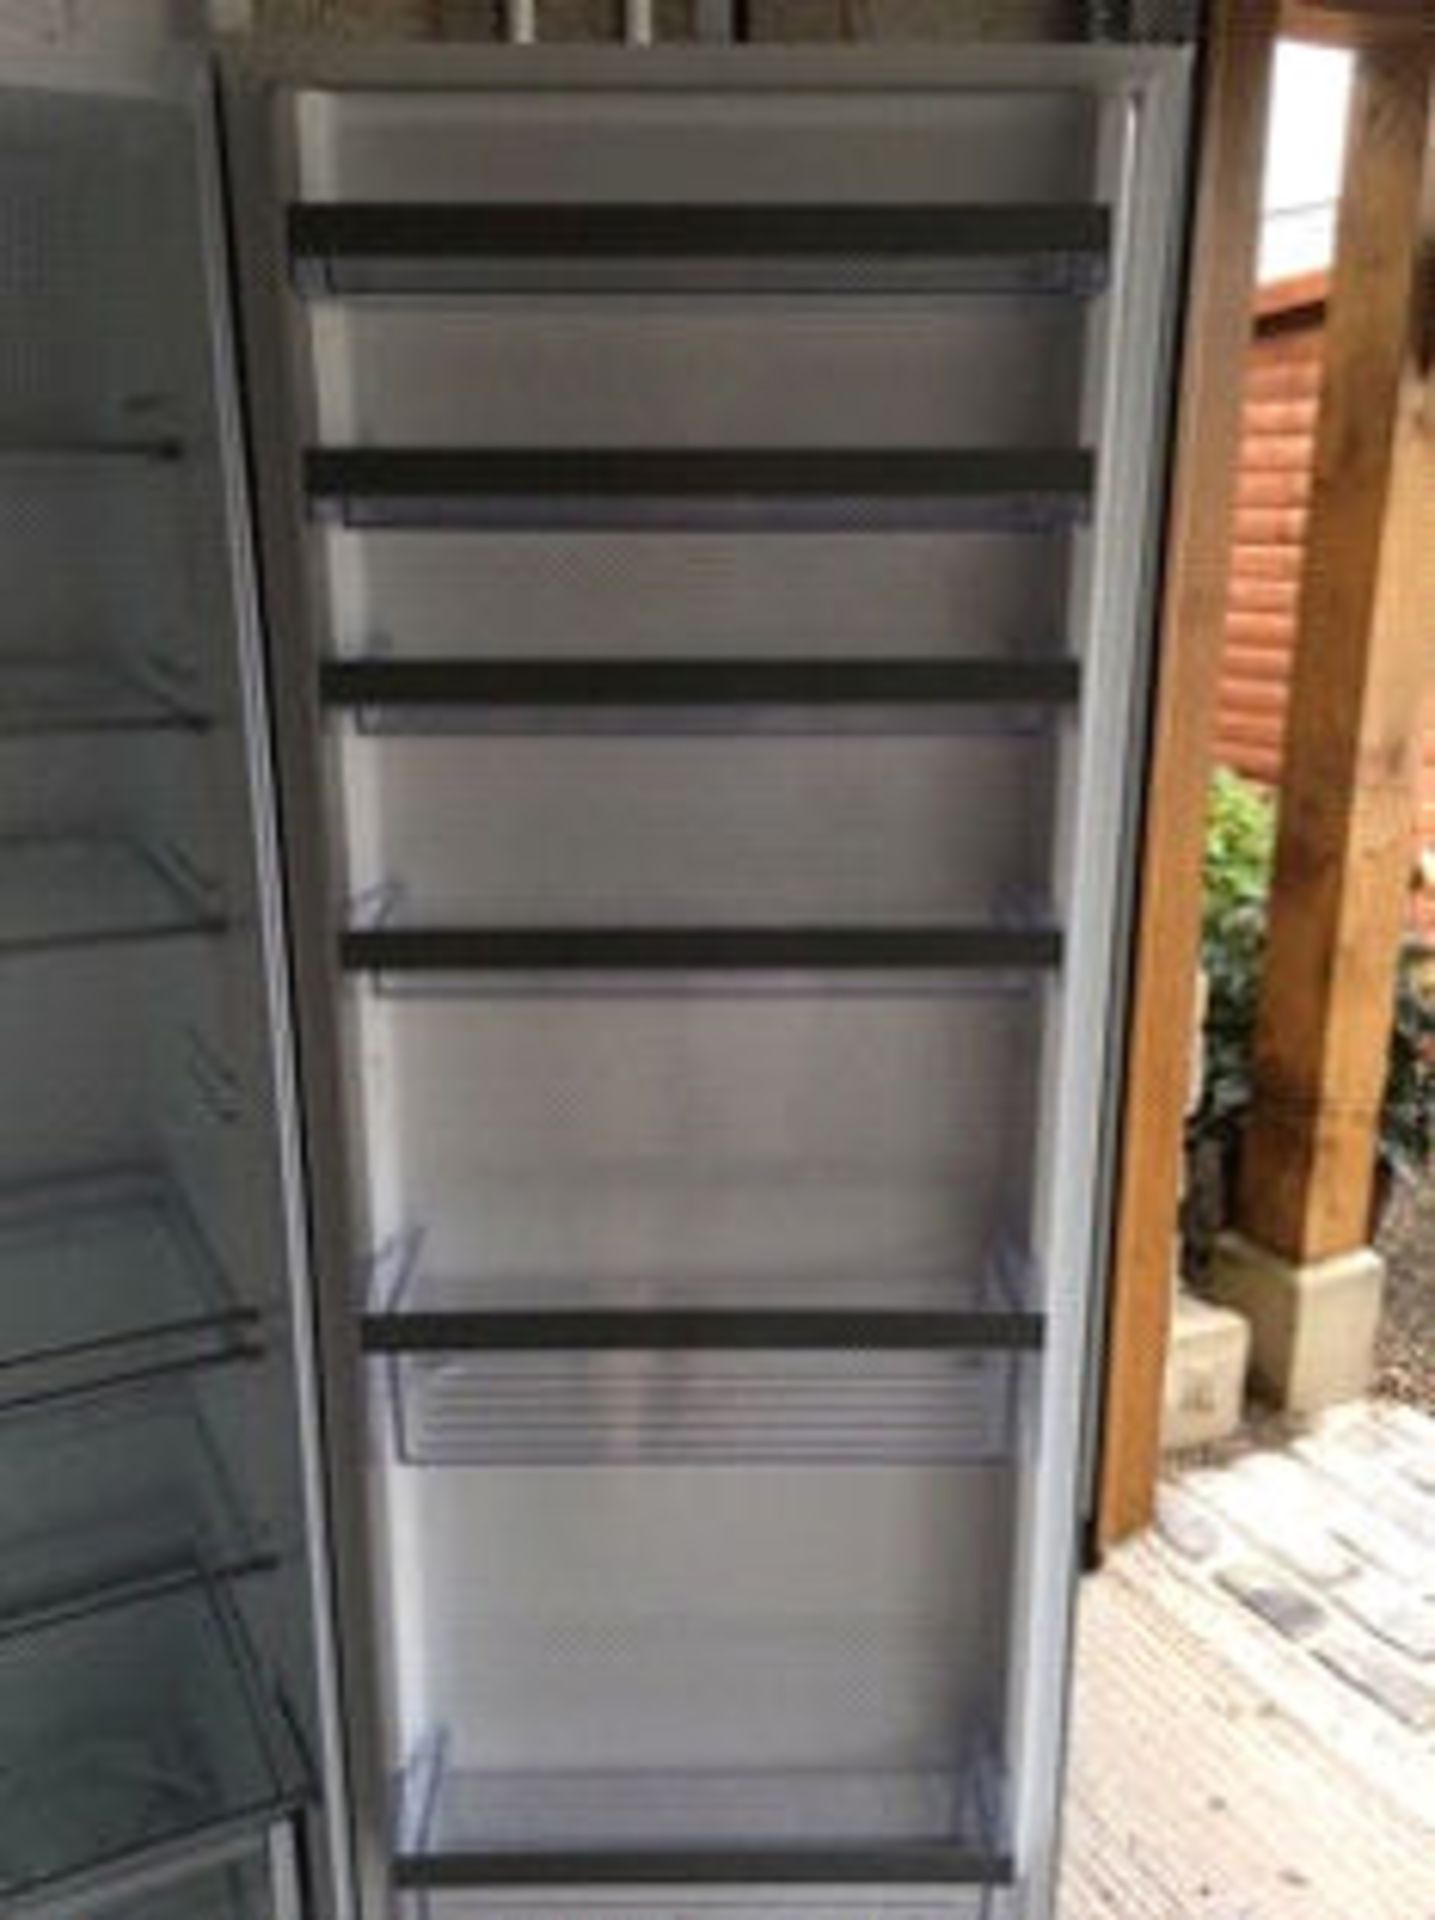 1 x NEFF KI1812S30G Integrated Tall Fridge - Only 6 Months Old - CL252 - Location: Longton, PR4 - NO - Image 4 of 6